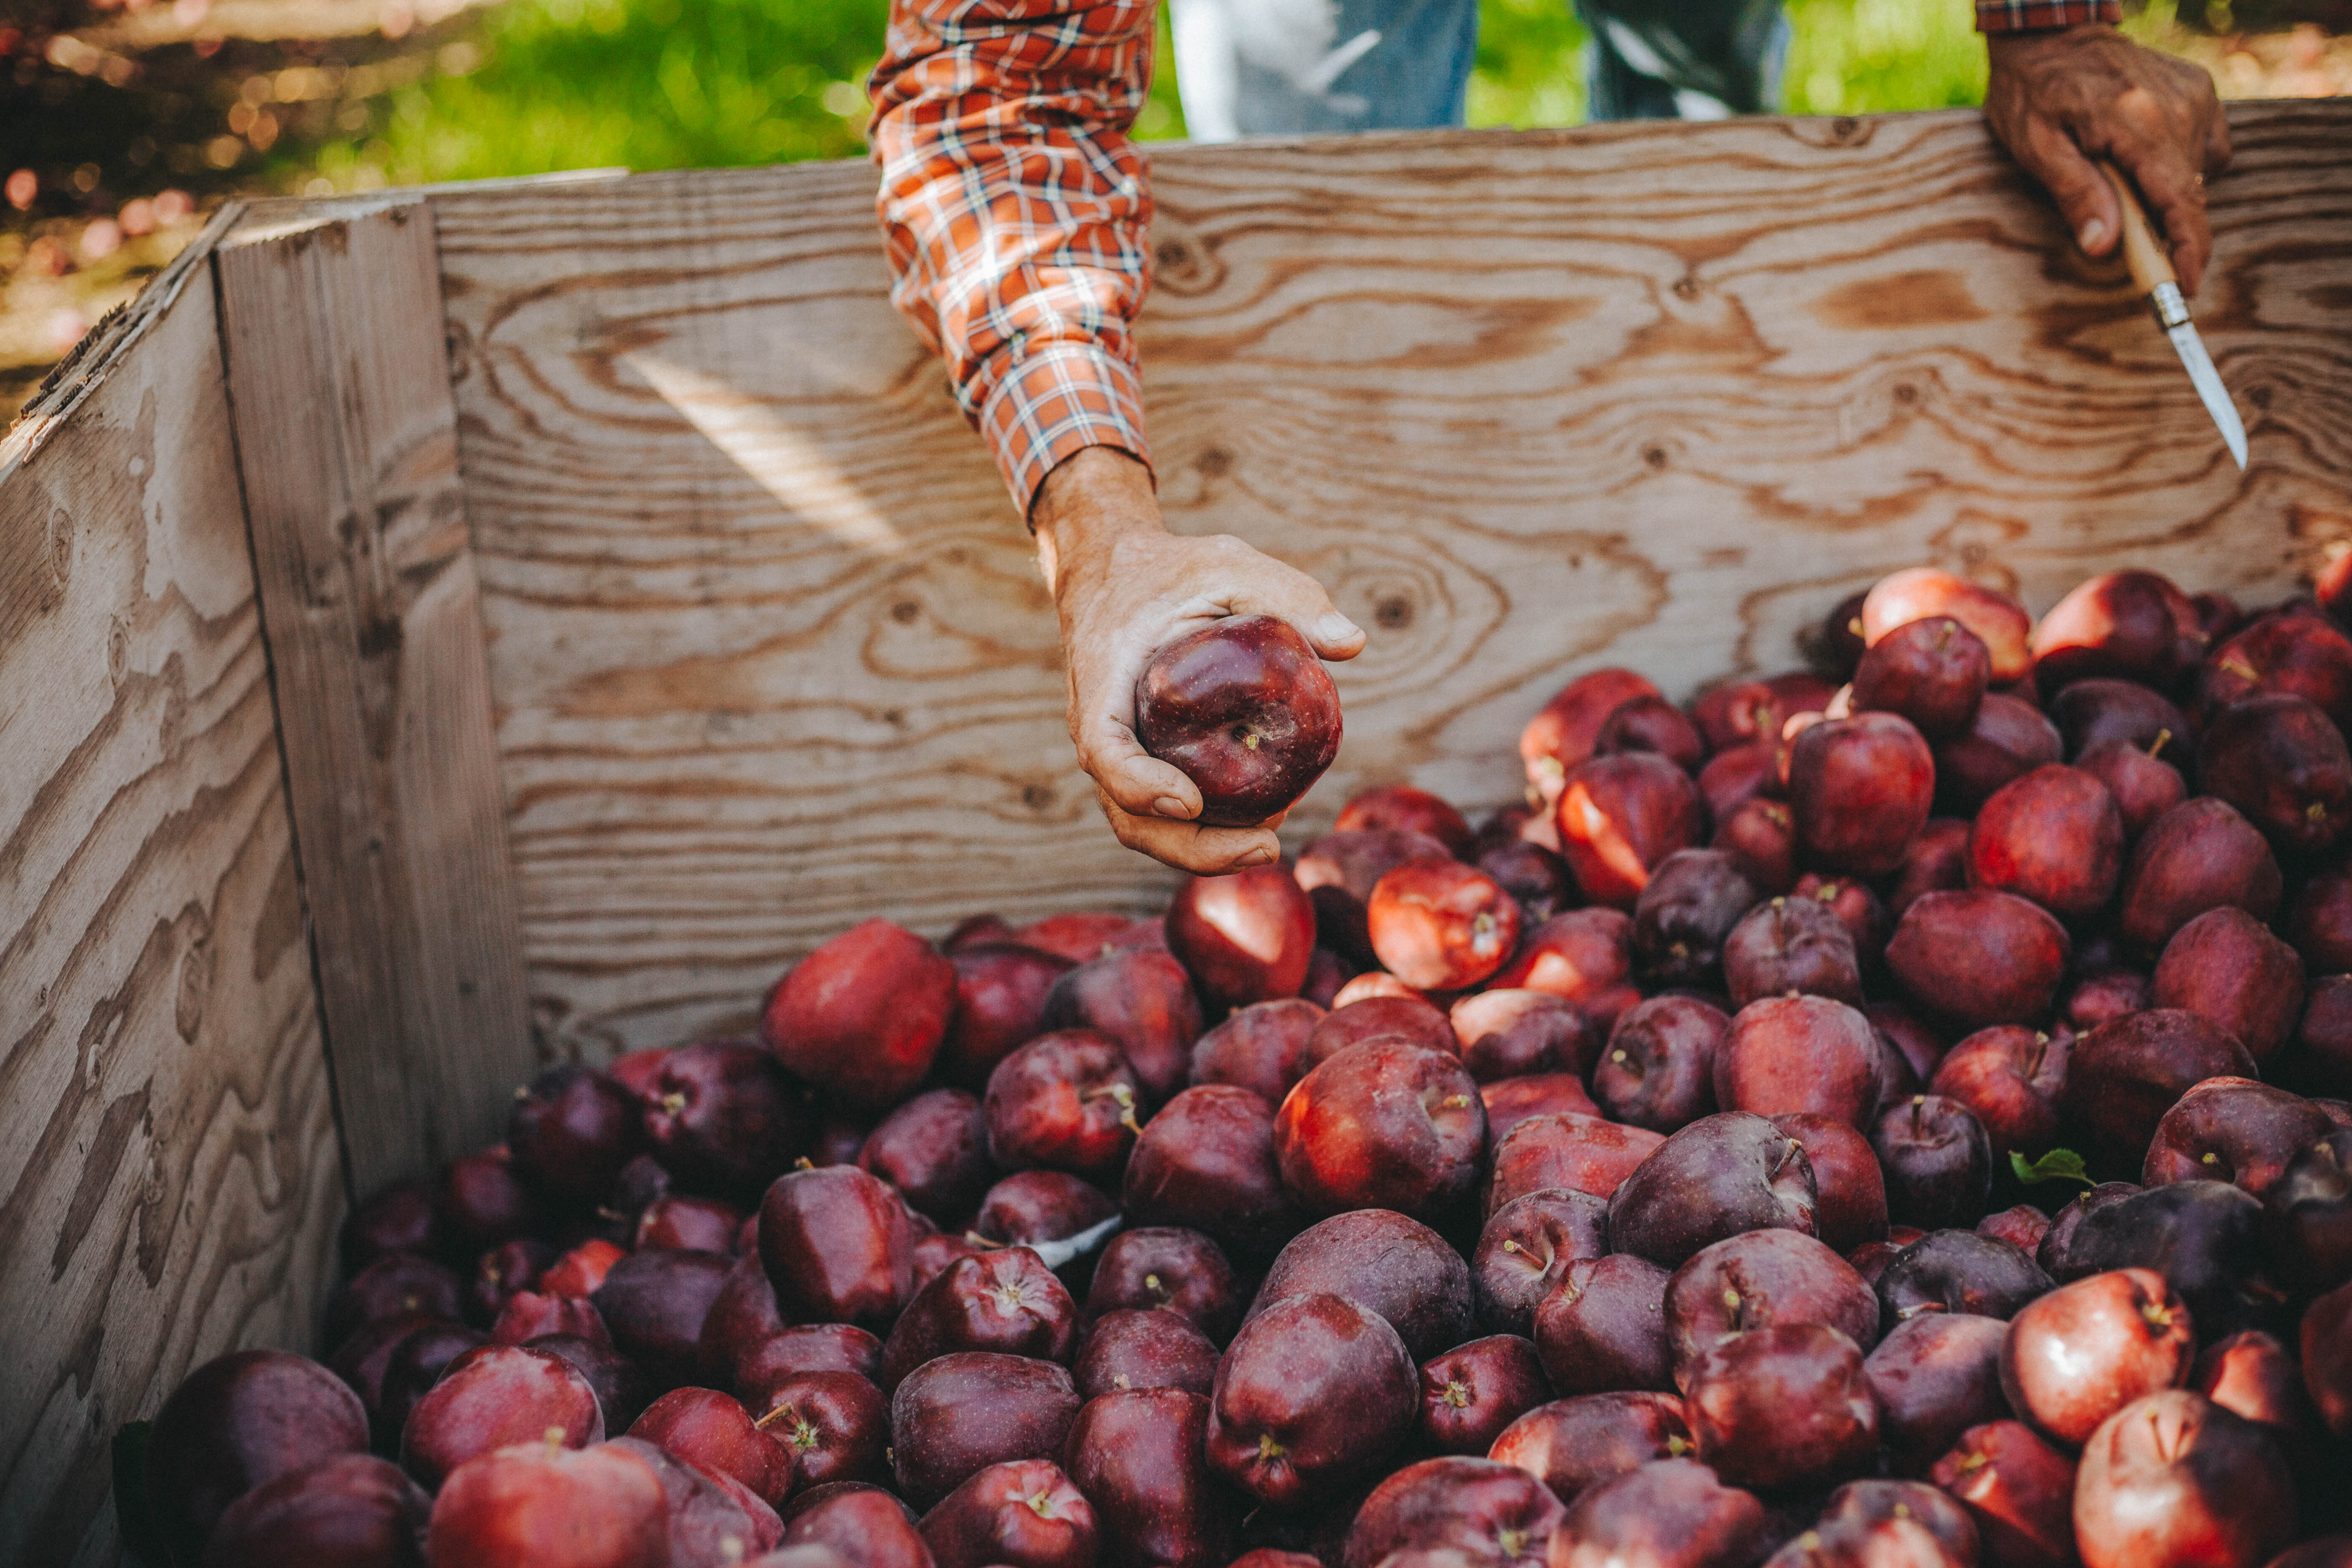 Freshly picked red delicious apples gather in a bin. Northwest red delicious and galas are again shipping to India after tariffs were lifted.